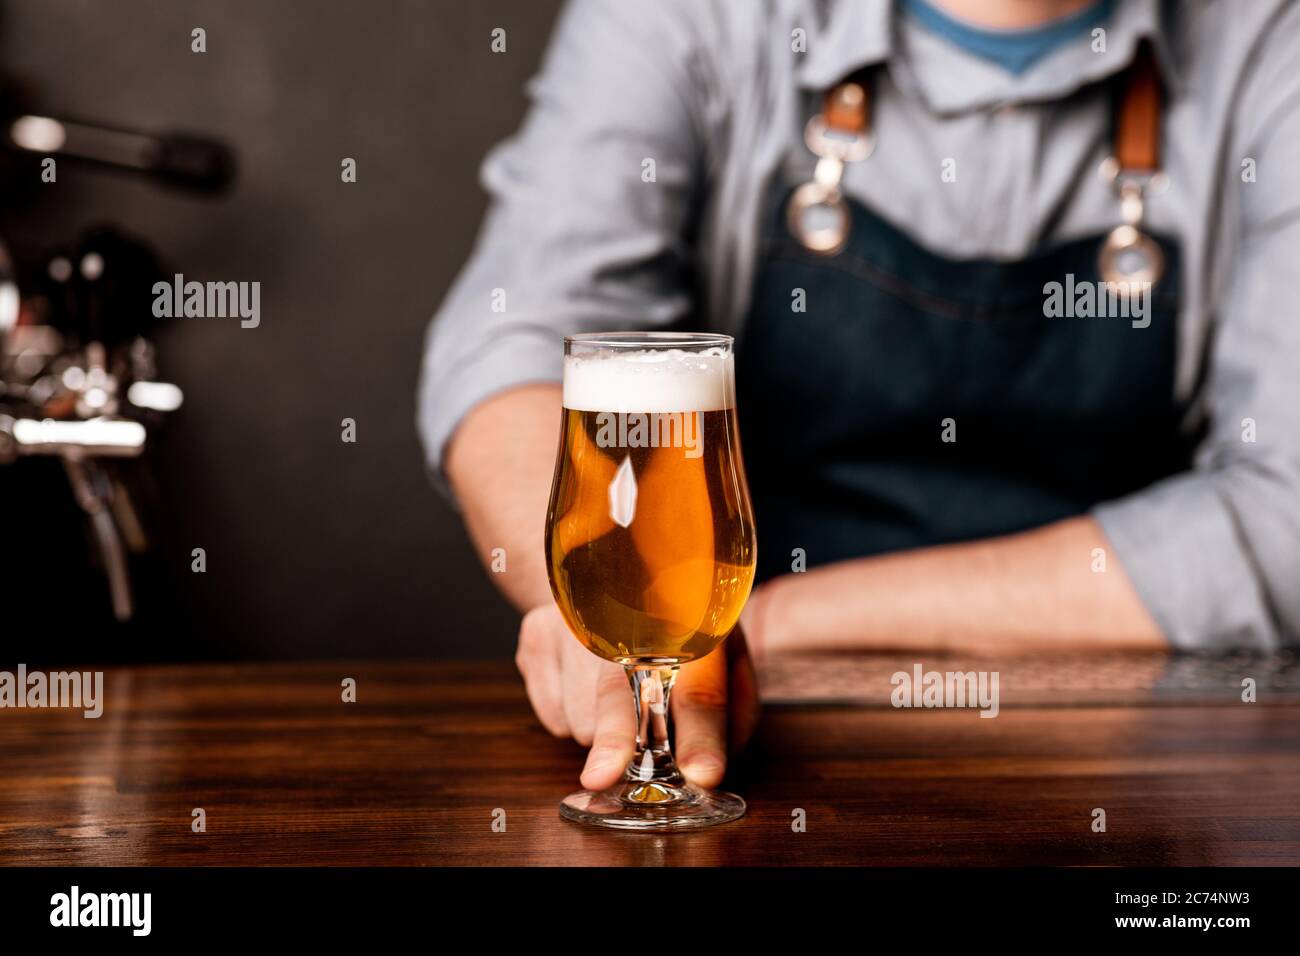 Pint of beer on bar in traditional style of pub. Guy in apron gives glass of light ale Stock Photo